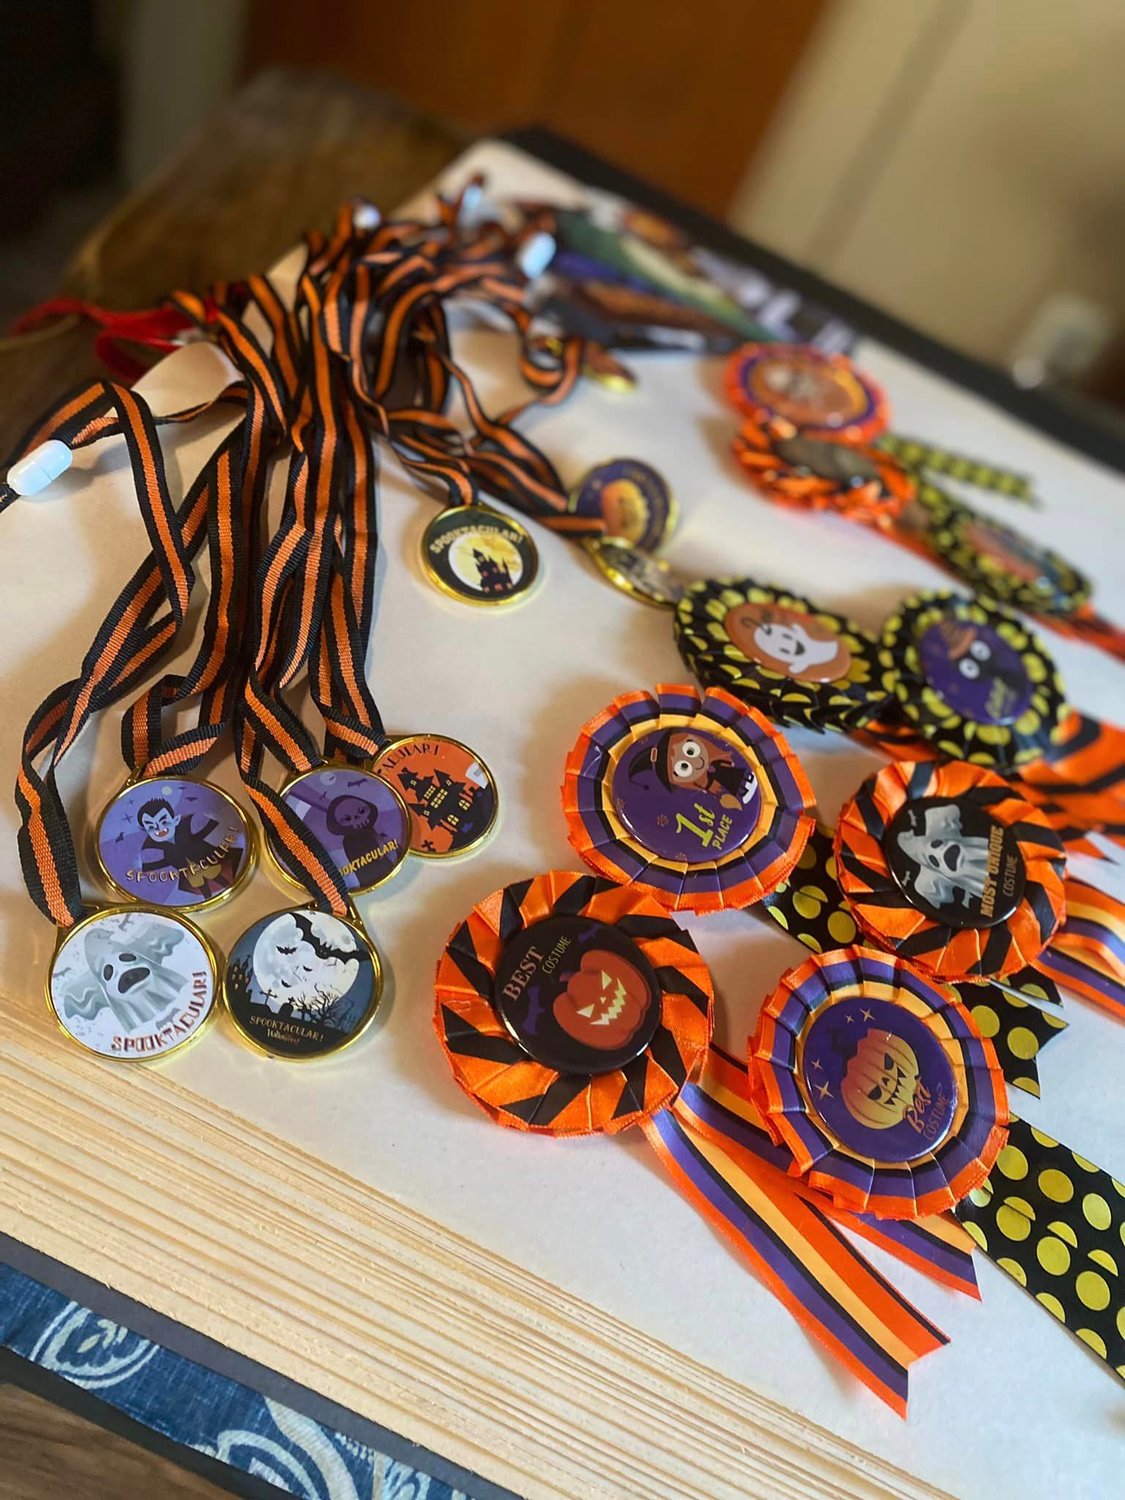 All along the walk, the Magic Council will be giving out ribbons and medals to young witchlings and wizards.